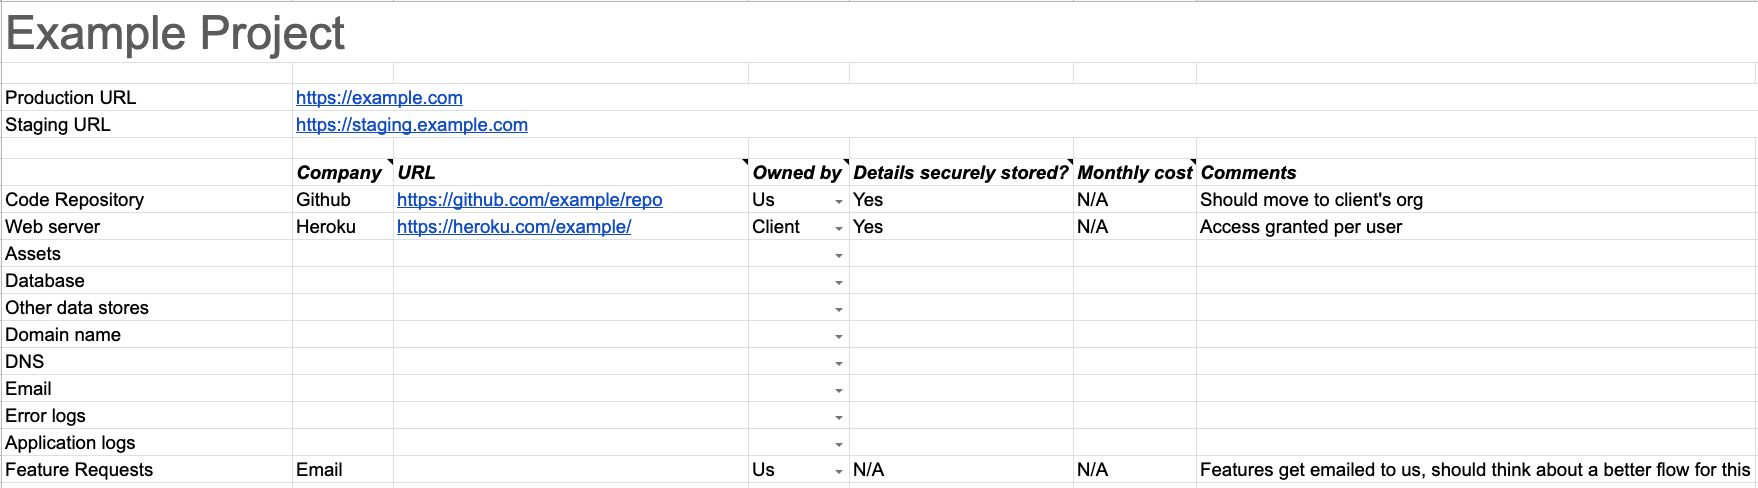 Spreadsheet with a heading called Example Project and example/dummy data entered for production and staging URLs and some of the project locations, like Code Repository and Web server. They link to dummy URLs and have comments like 'should move to clients org'